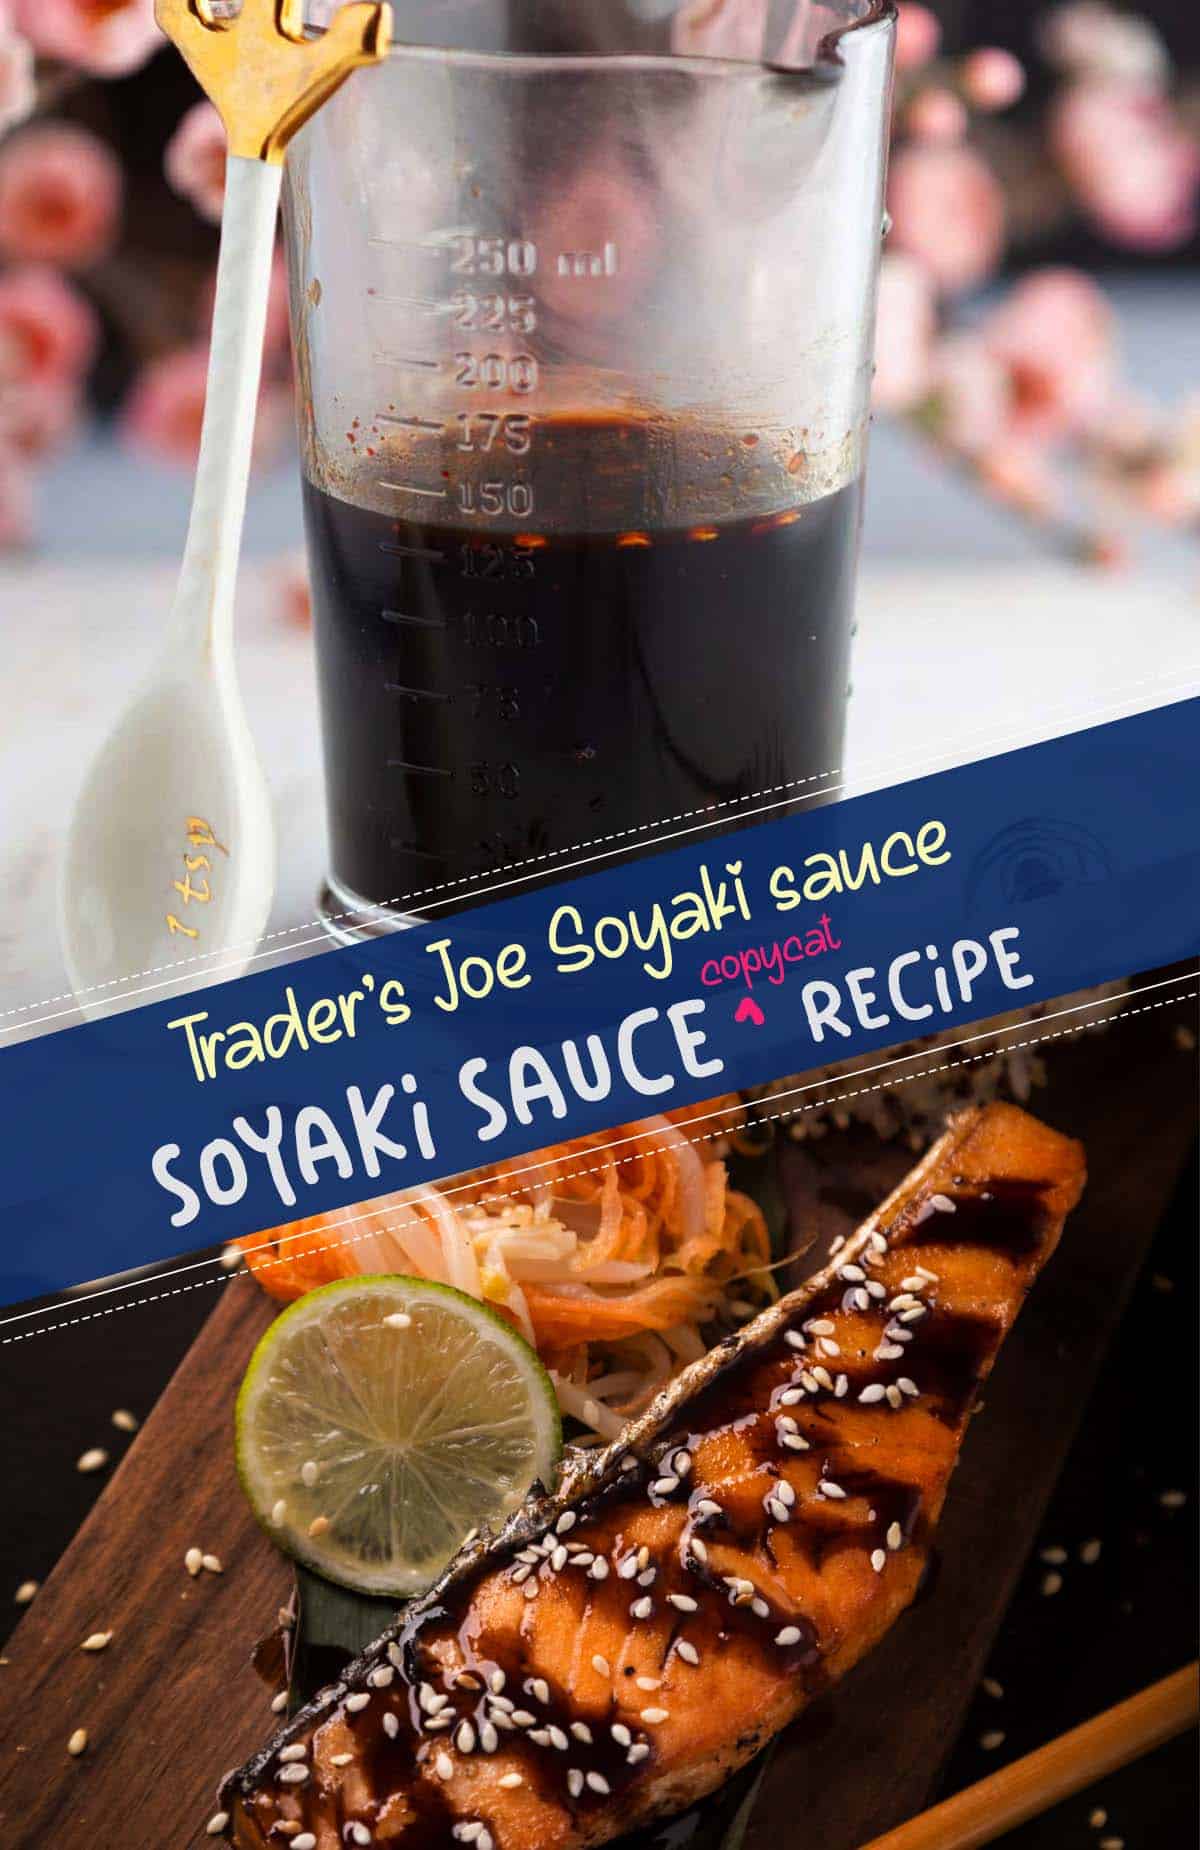 This Soyaki sauce was the perfect blend of sweet, savory, and tangy flavors, perfect for marinating or as a dipping sauce for various dishes. Let me walk you through the process of making this delightful sauce.